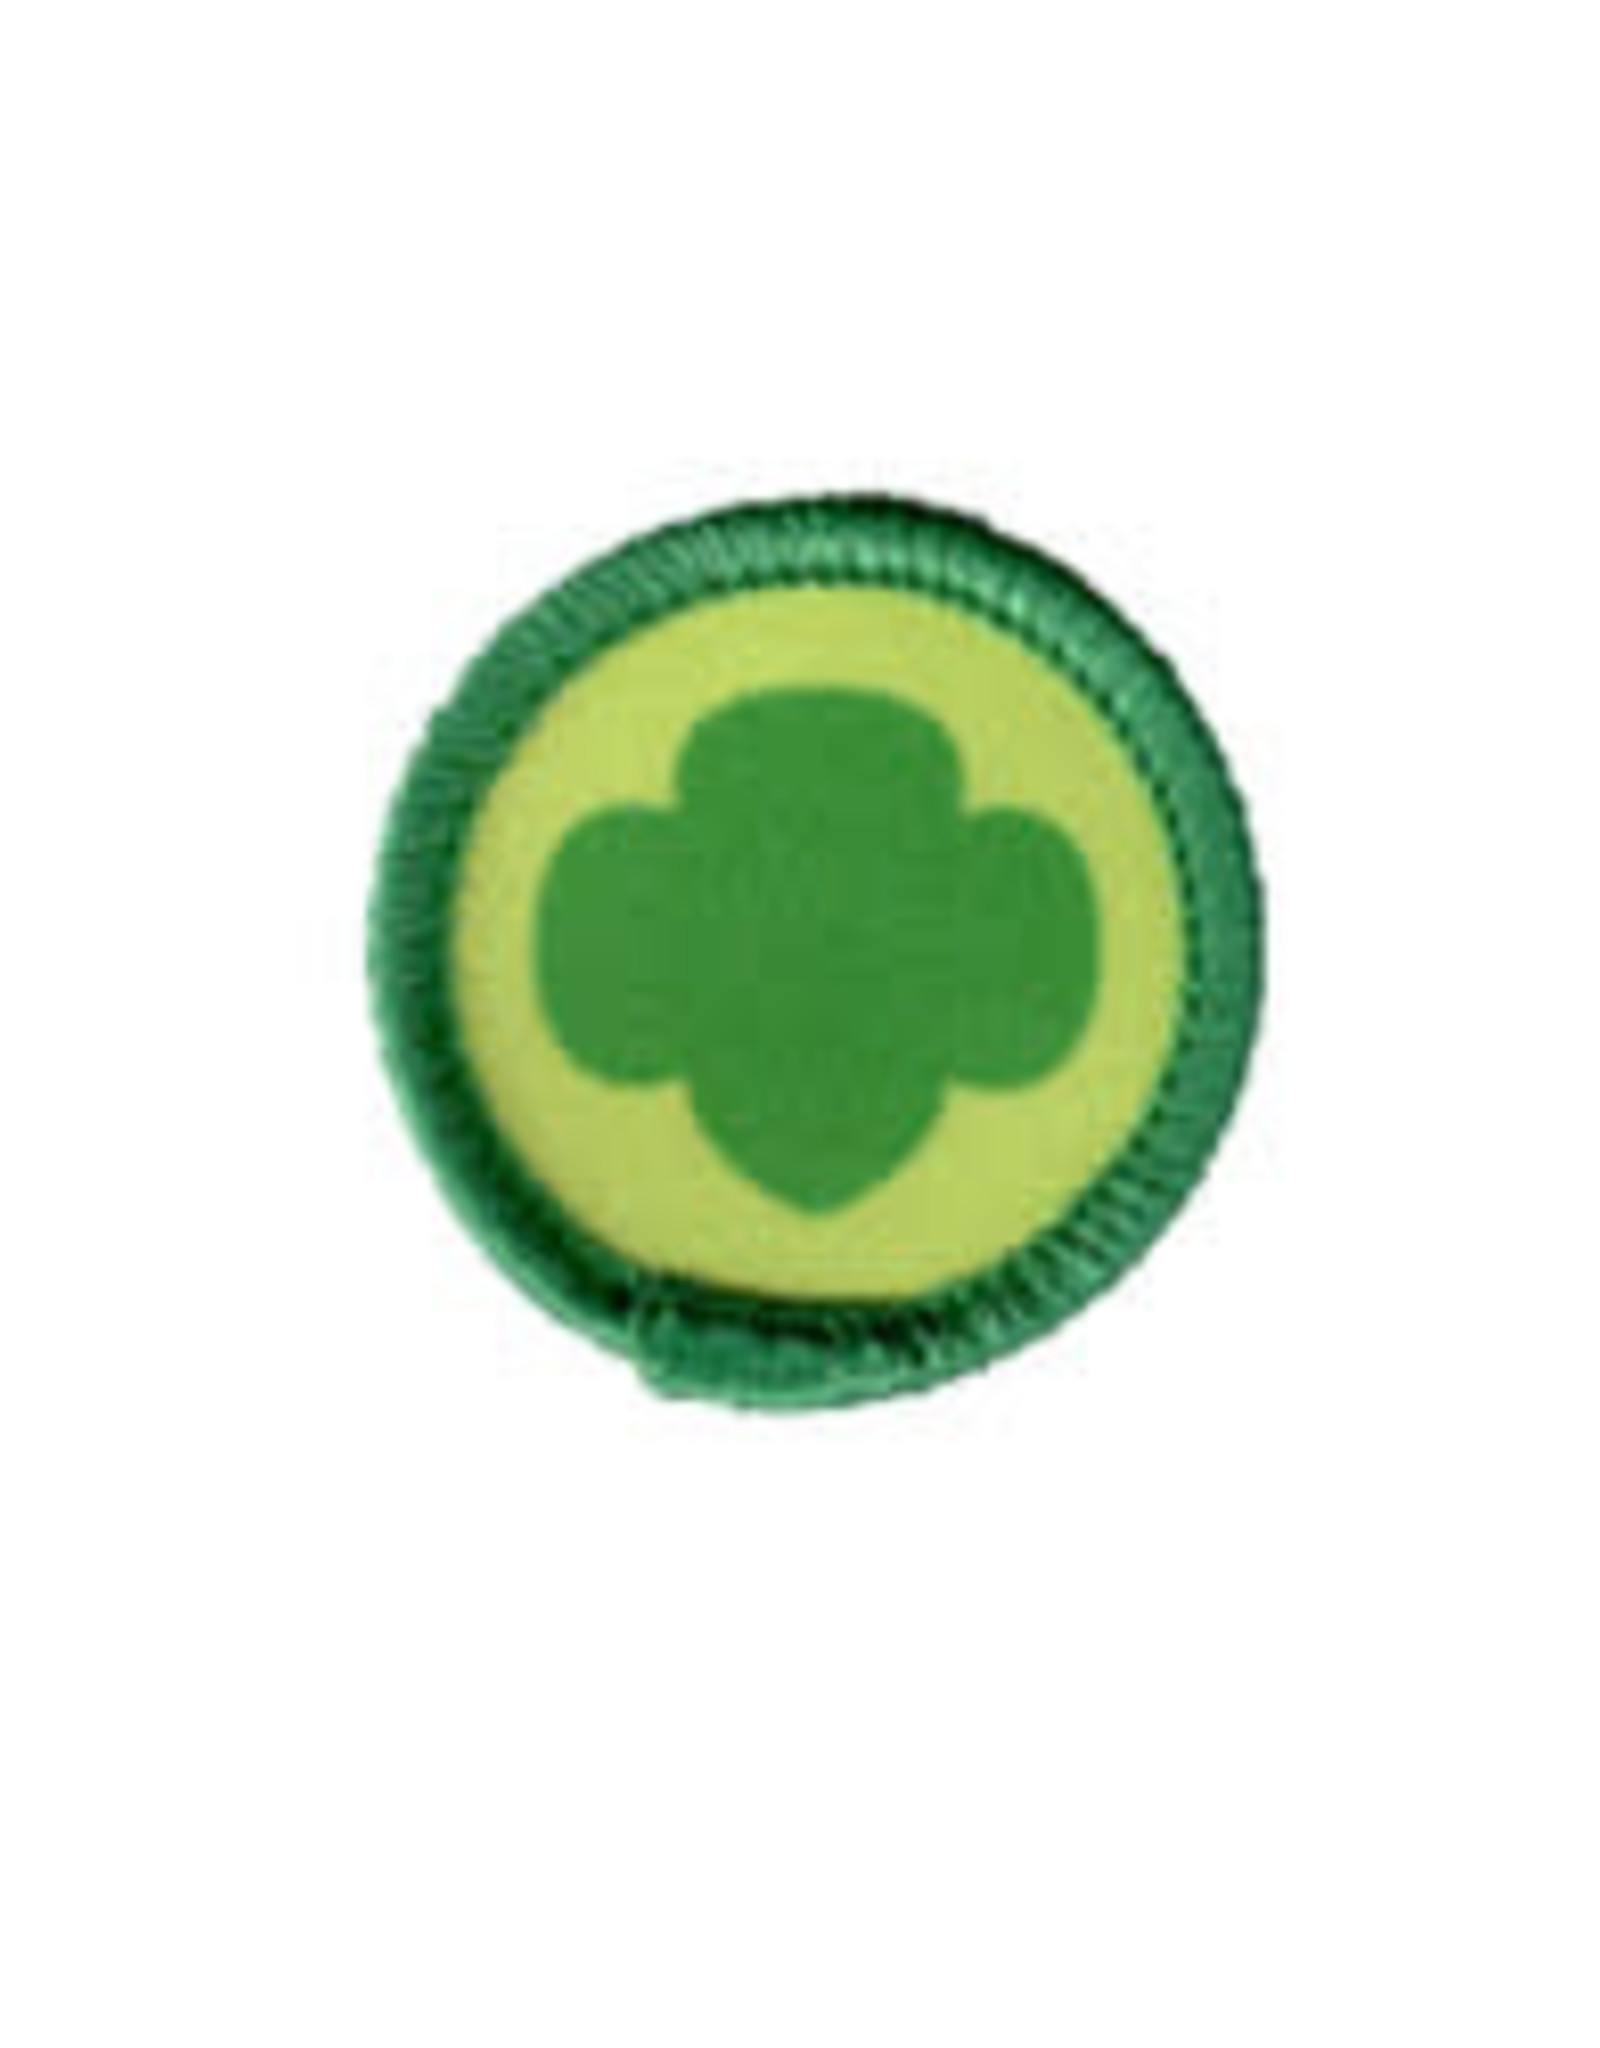 GSUSA Girl Scout Trefoil Center Sew-On Patch